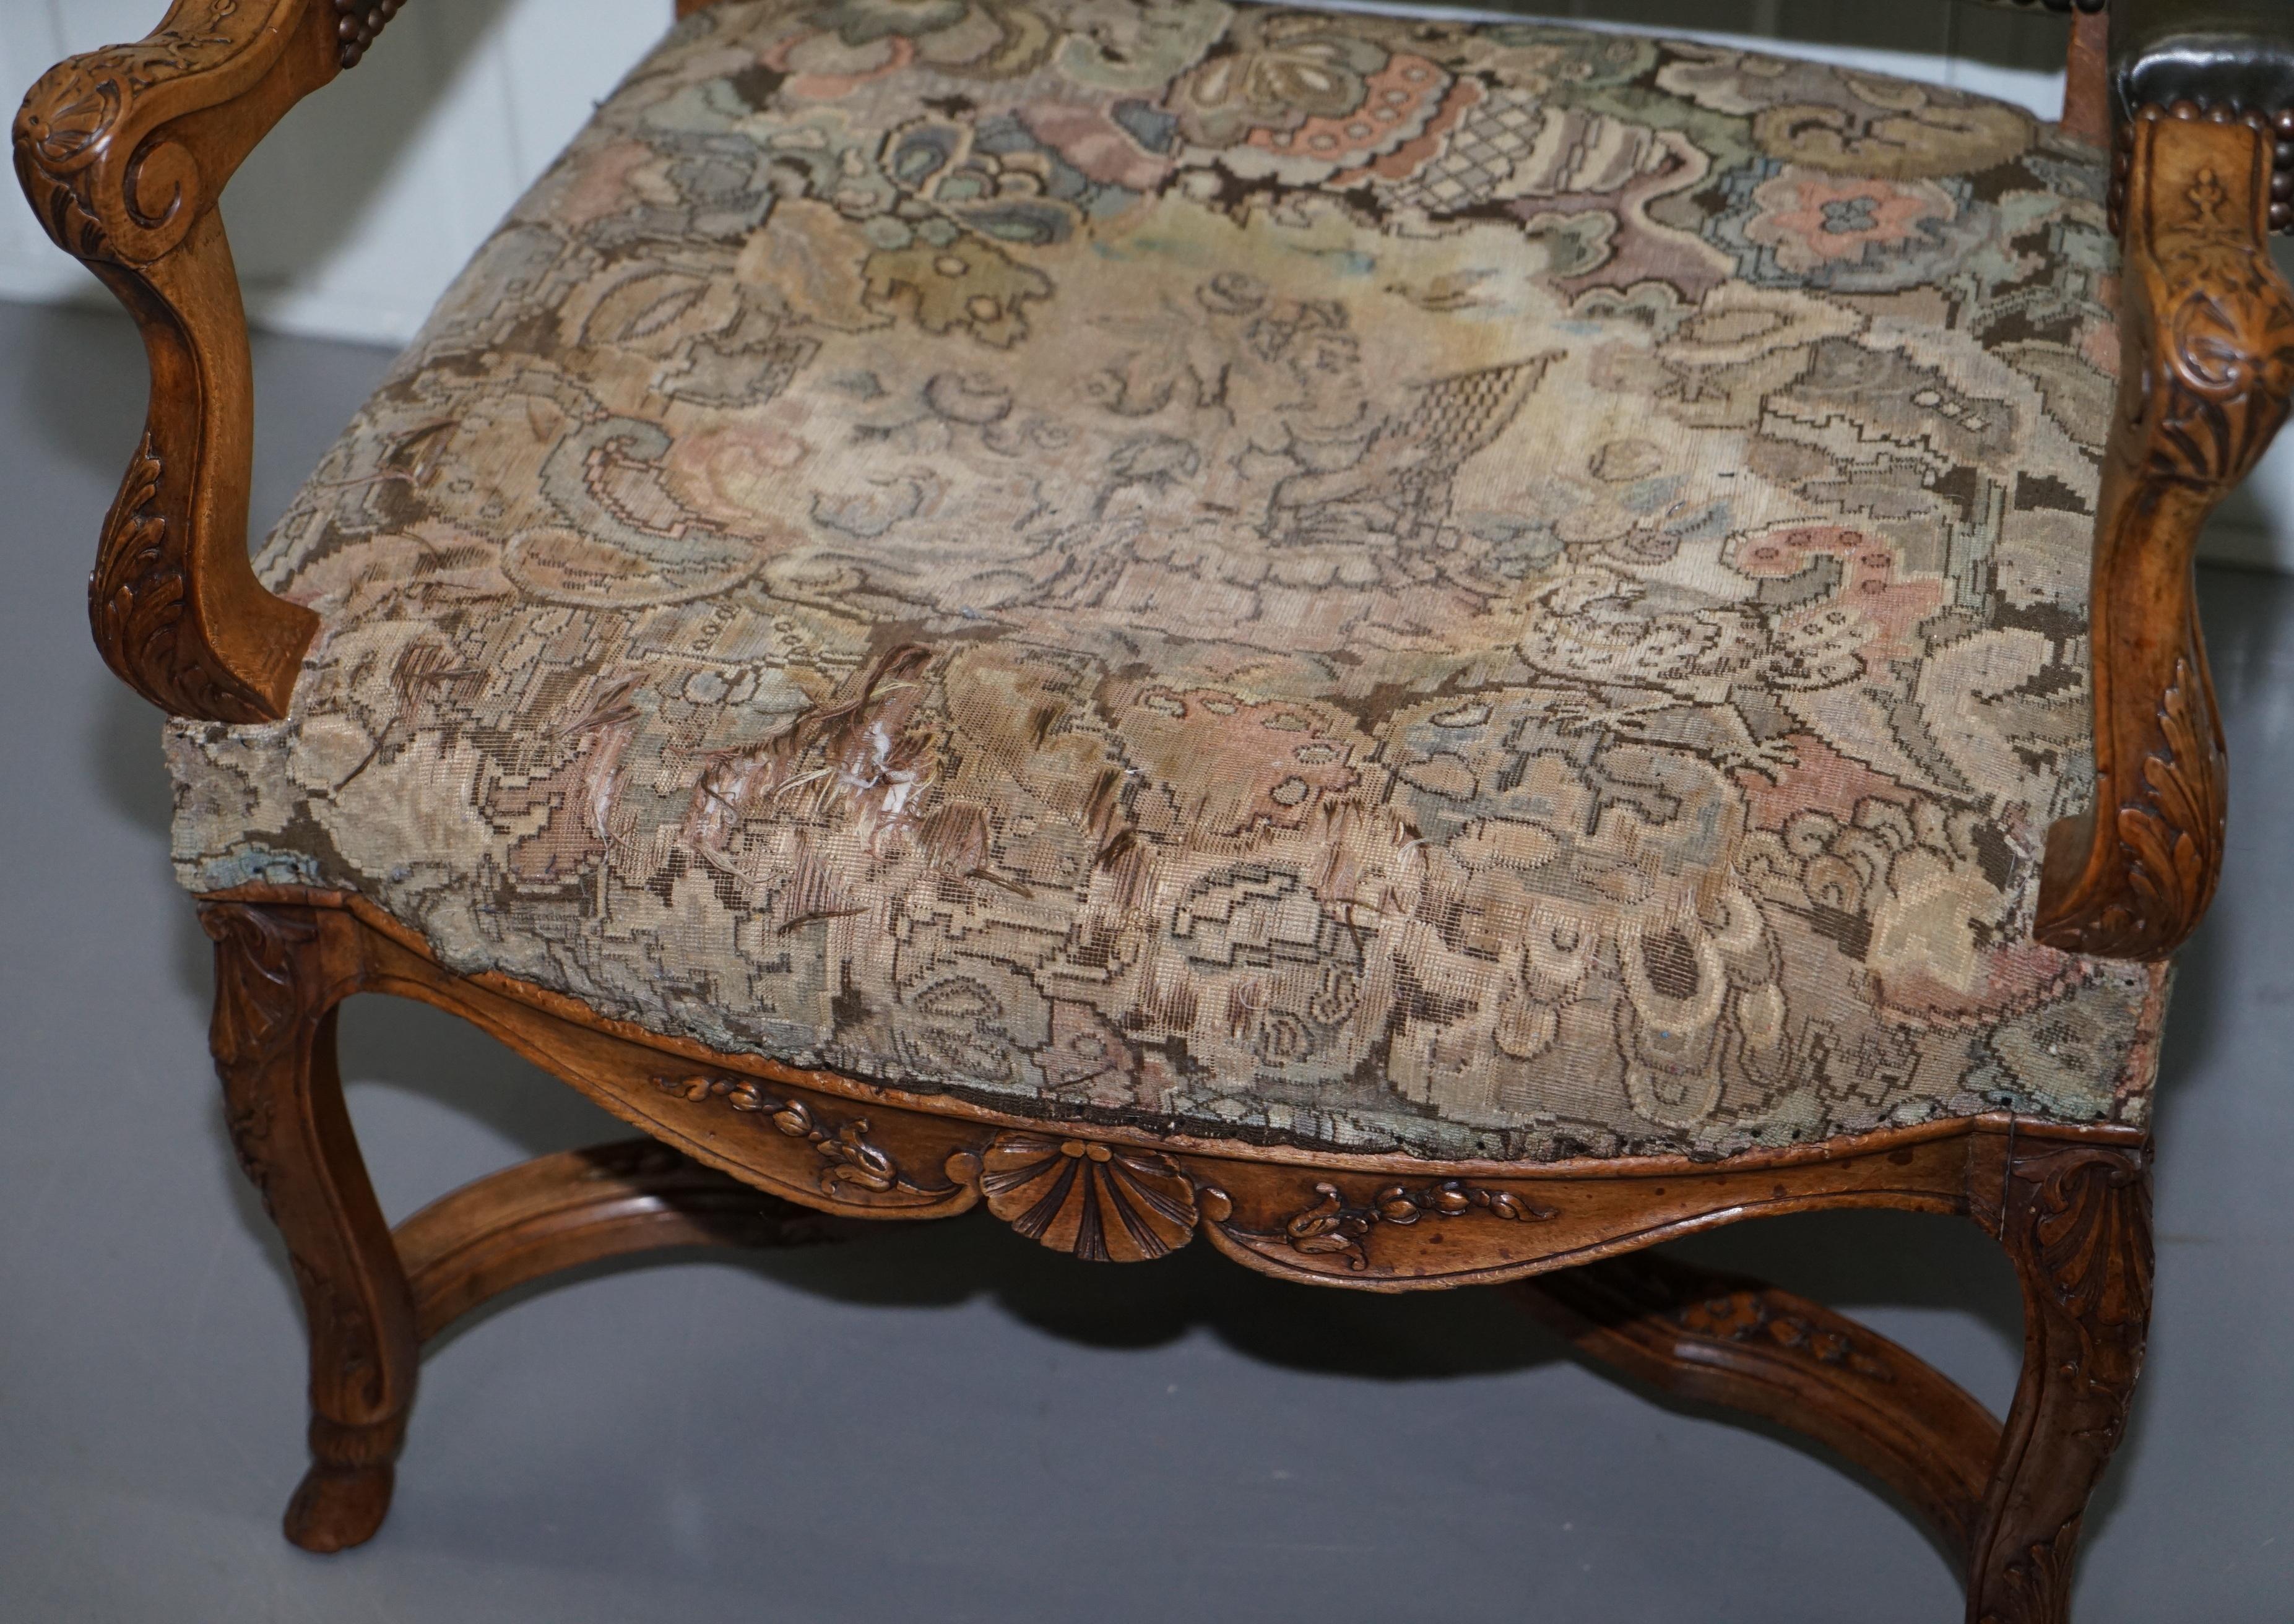 Upholstery Rare 19th Century French Embroidered Armchair Ornately Carved Frame High Back For Sale